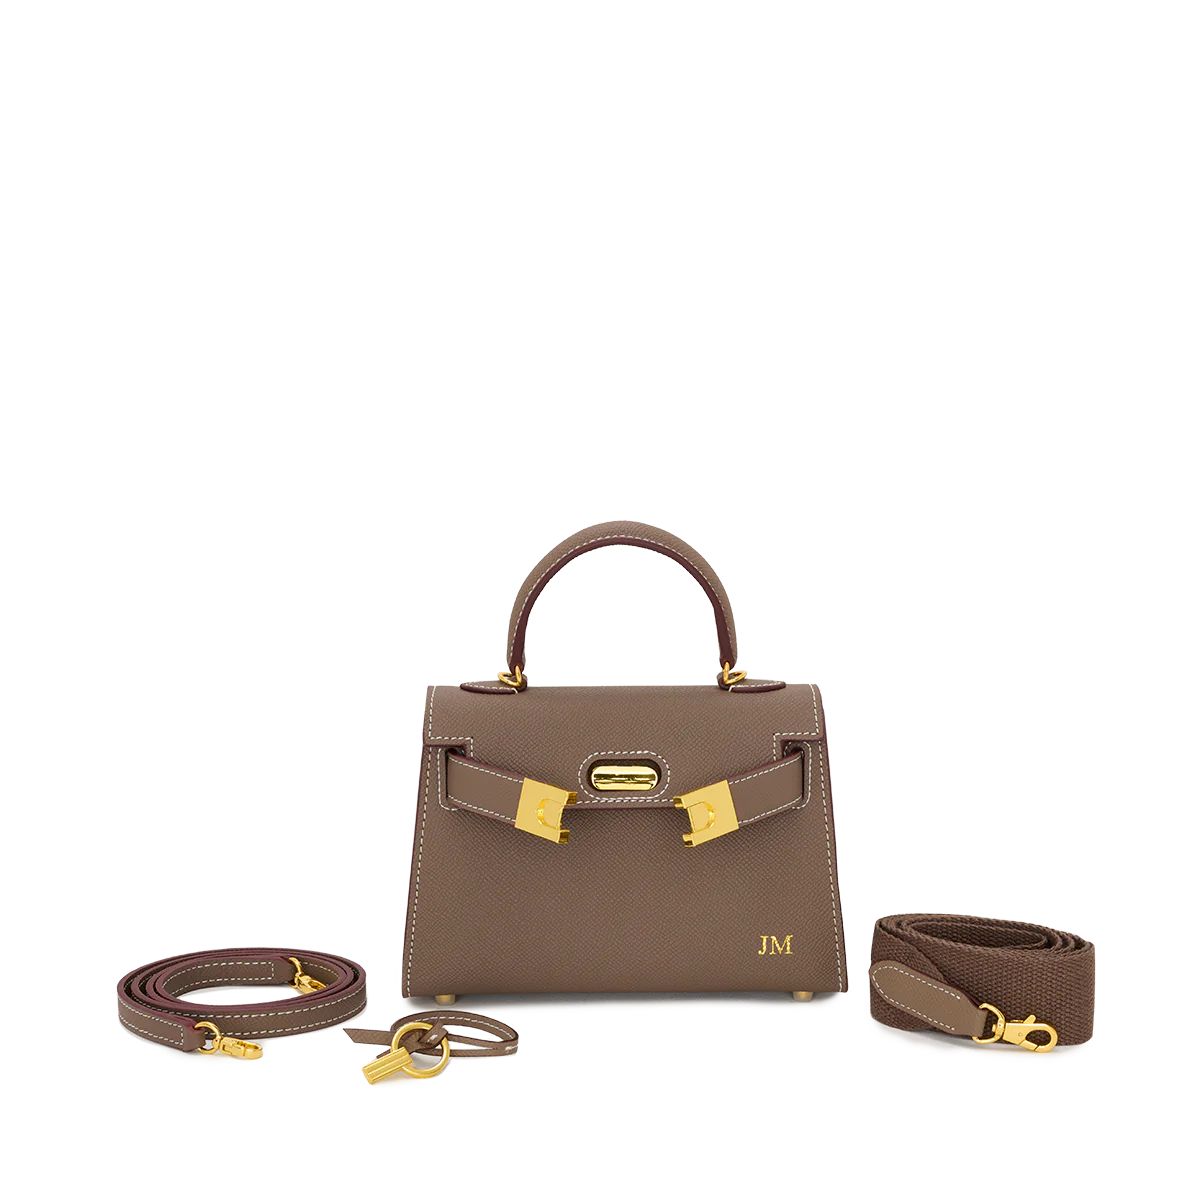 Lily and Bean Evie Leather Bag Mocha | Lily and Bean